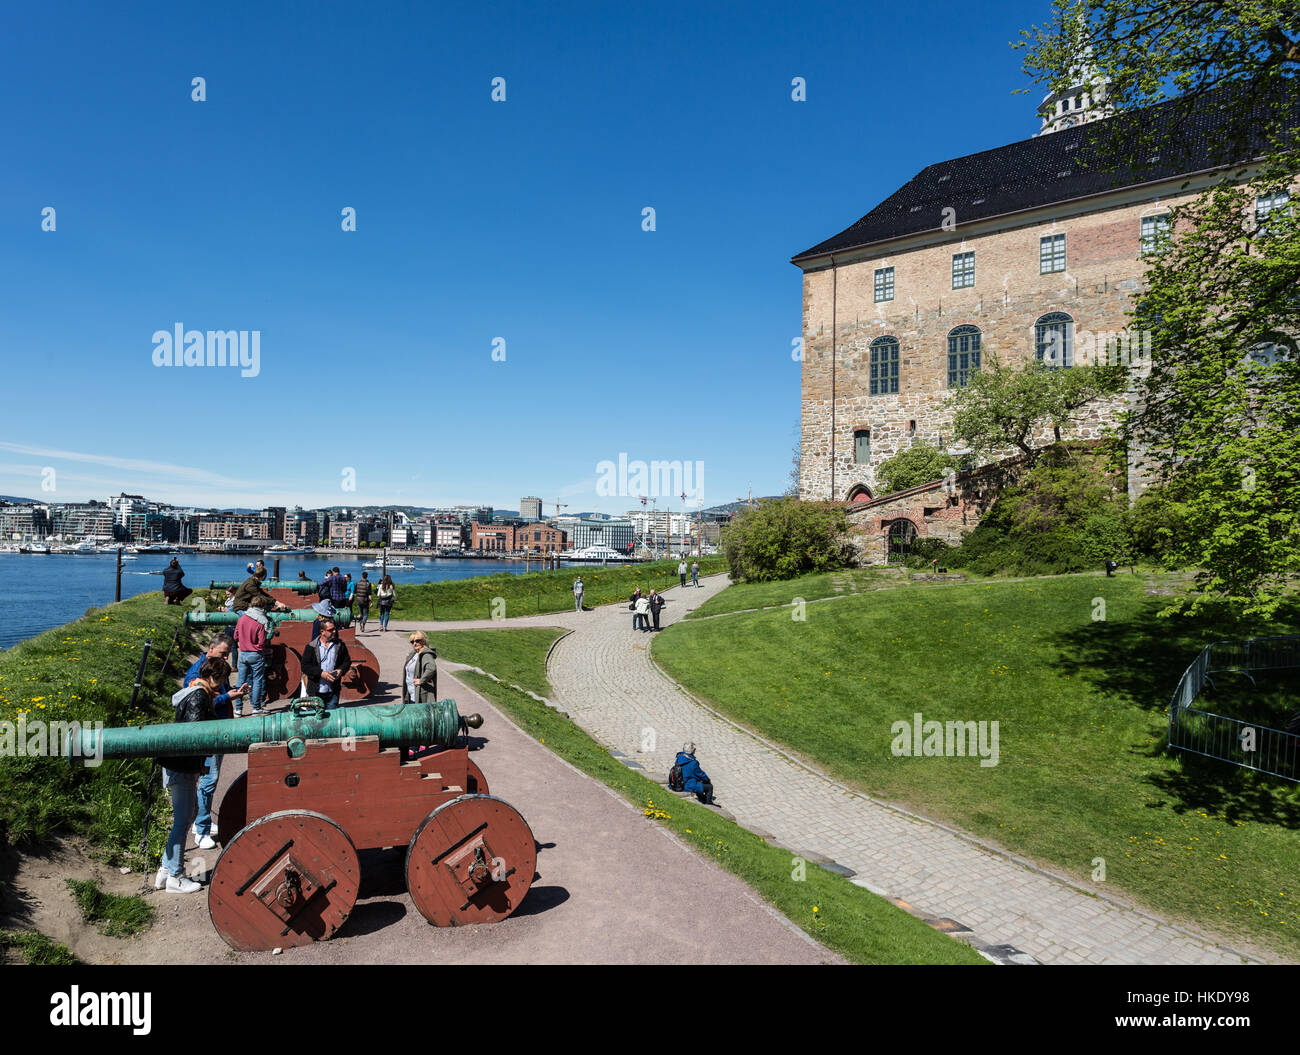 OSLO, NORWAY - MAY 16, 2016: Tourists watch the old canon in front of the Akershus Fortress in Oslo. This is one of the Norwegian capital city main la Stock Photo